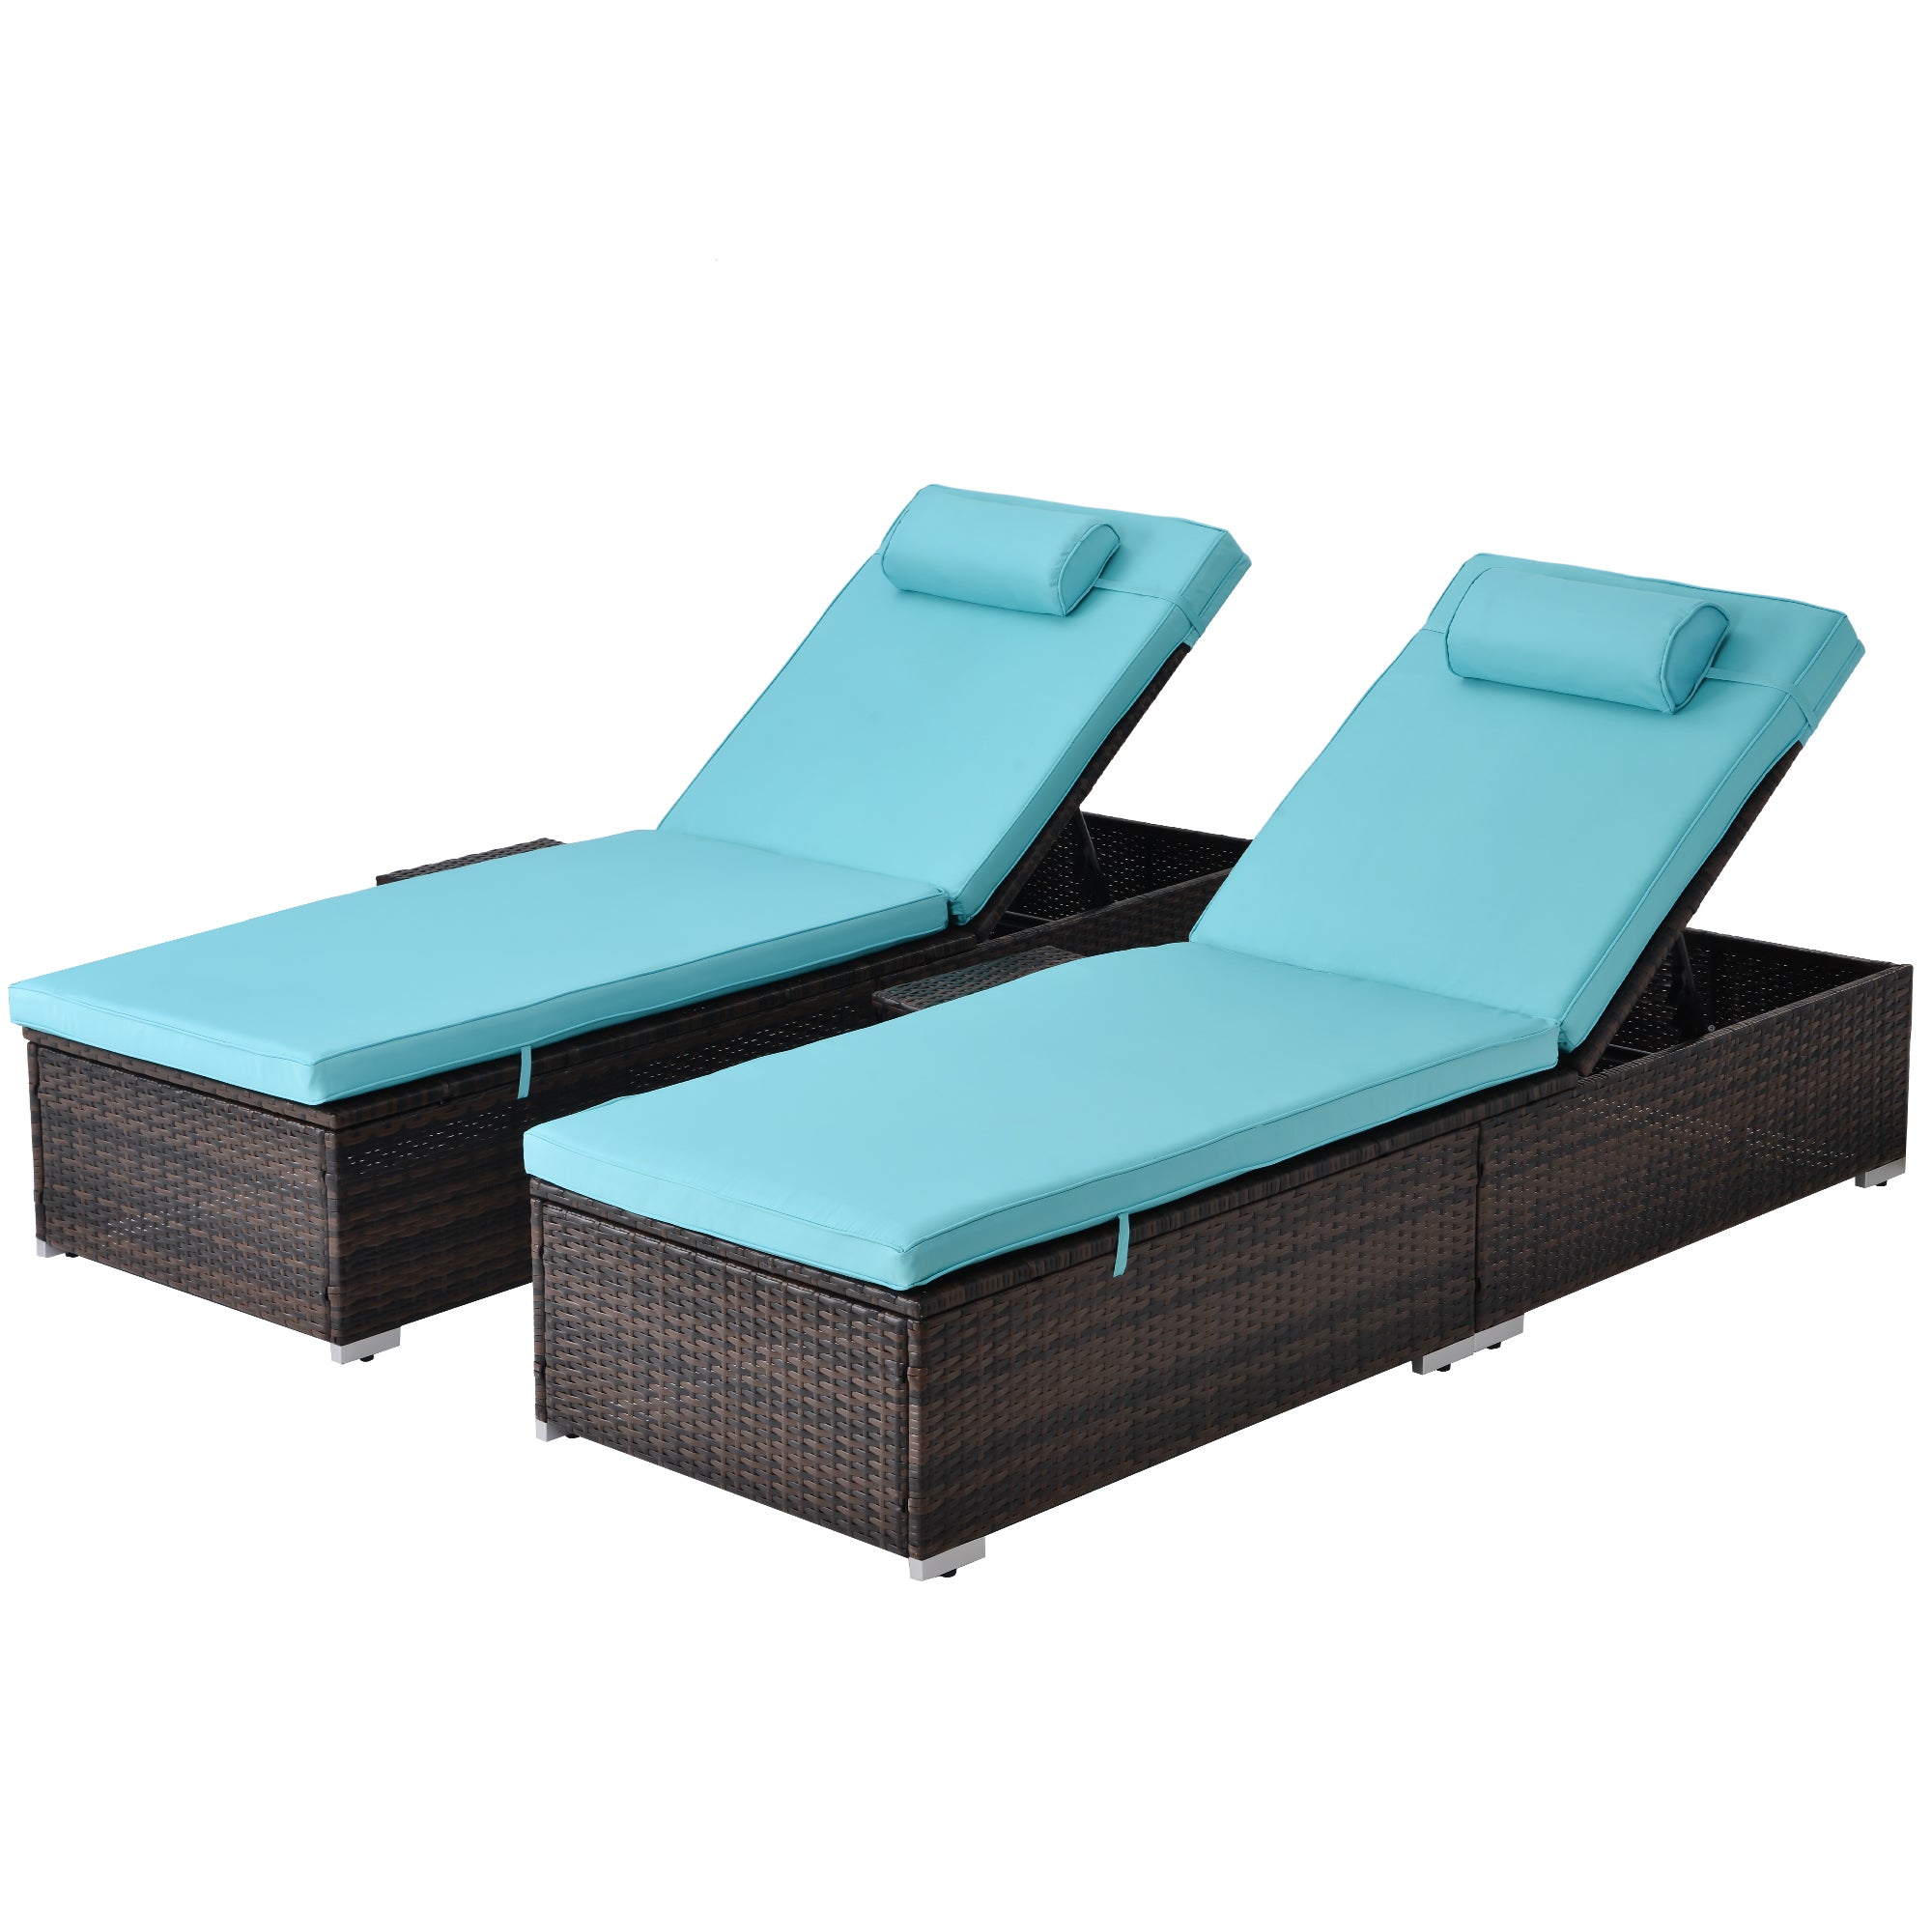 SAME AS W213S00075: Outdoor PE Wicker Chaise Lounge - 2 Piece patio lounge chair; chase longue; lazy boy recliner;outdoor lounge chairs set of 2;beach chairs; recliner chair with side table